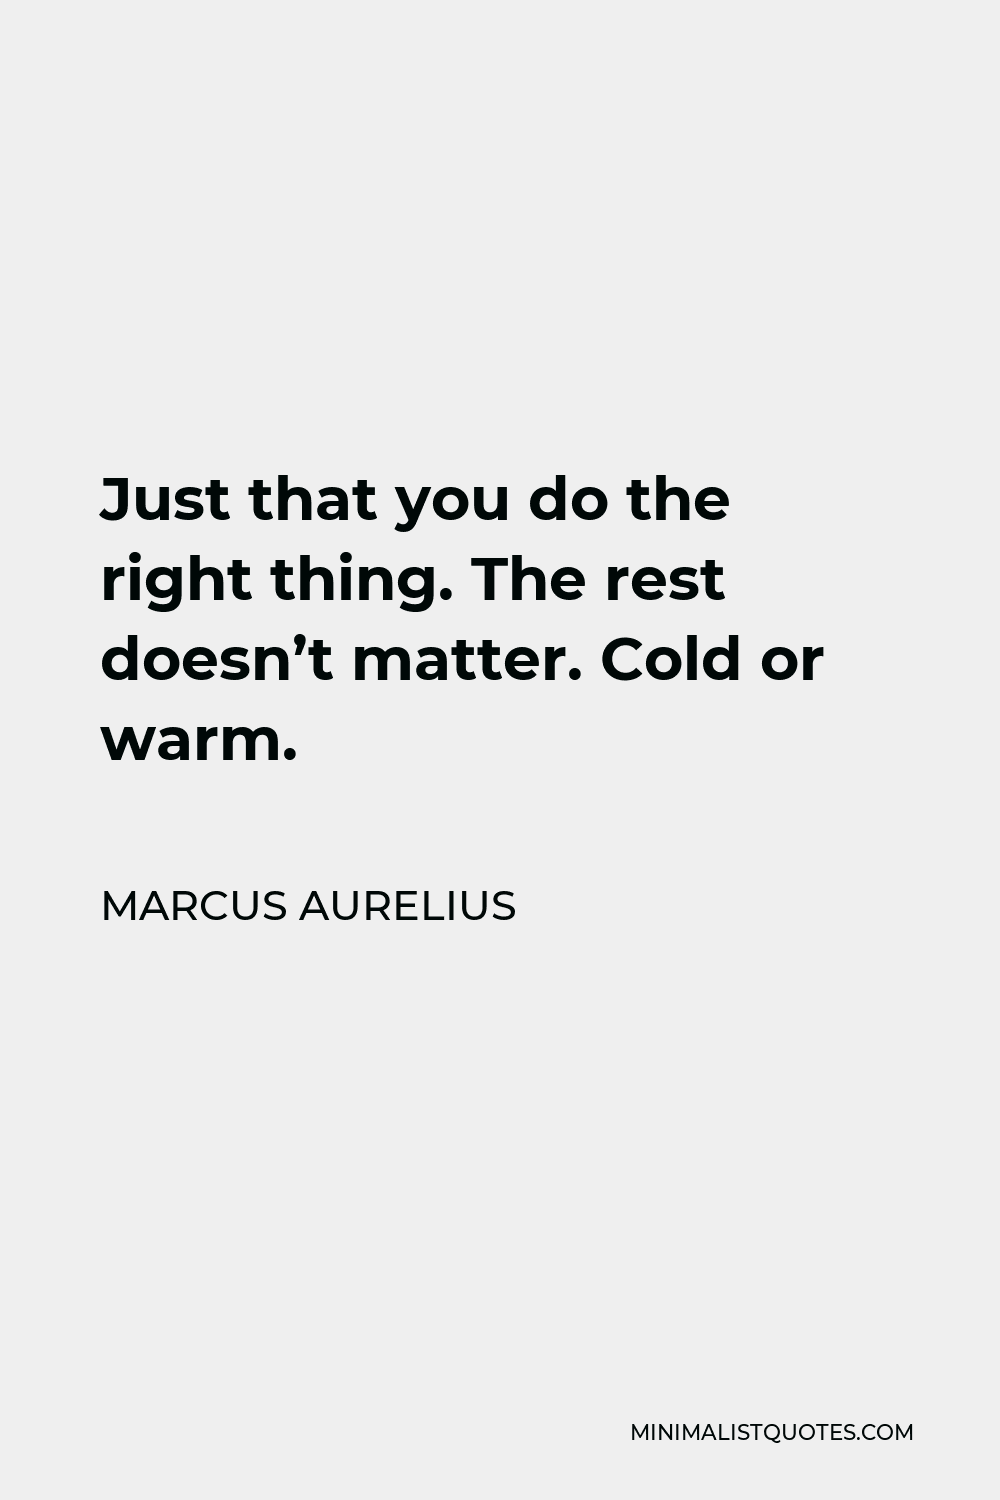 Marcus Aurelius Quote - Just that you do the right thing. The rest doesn’t matter. Cold or warm.